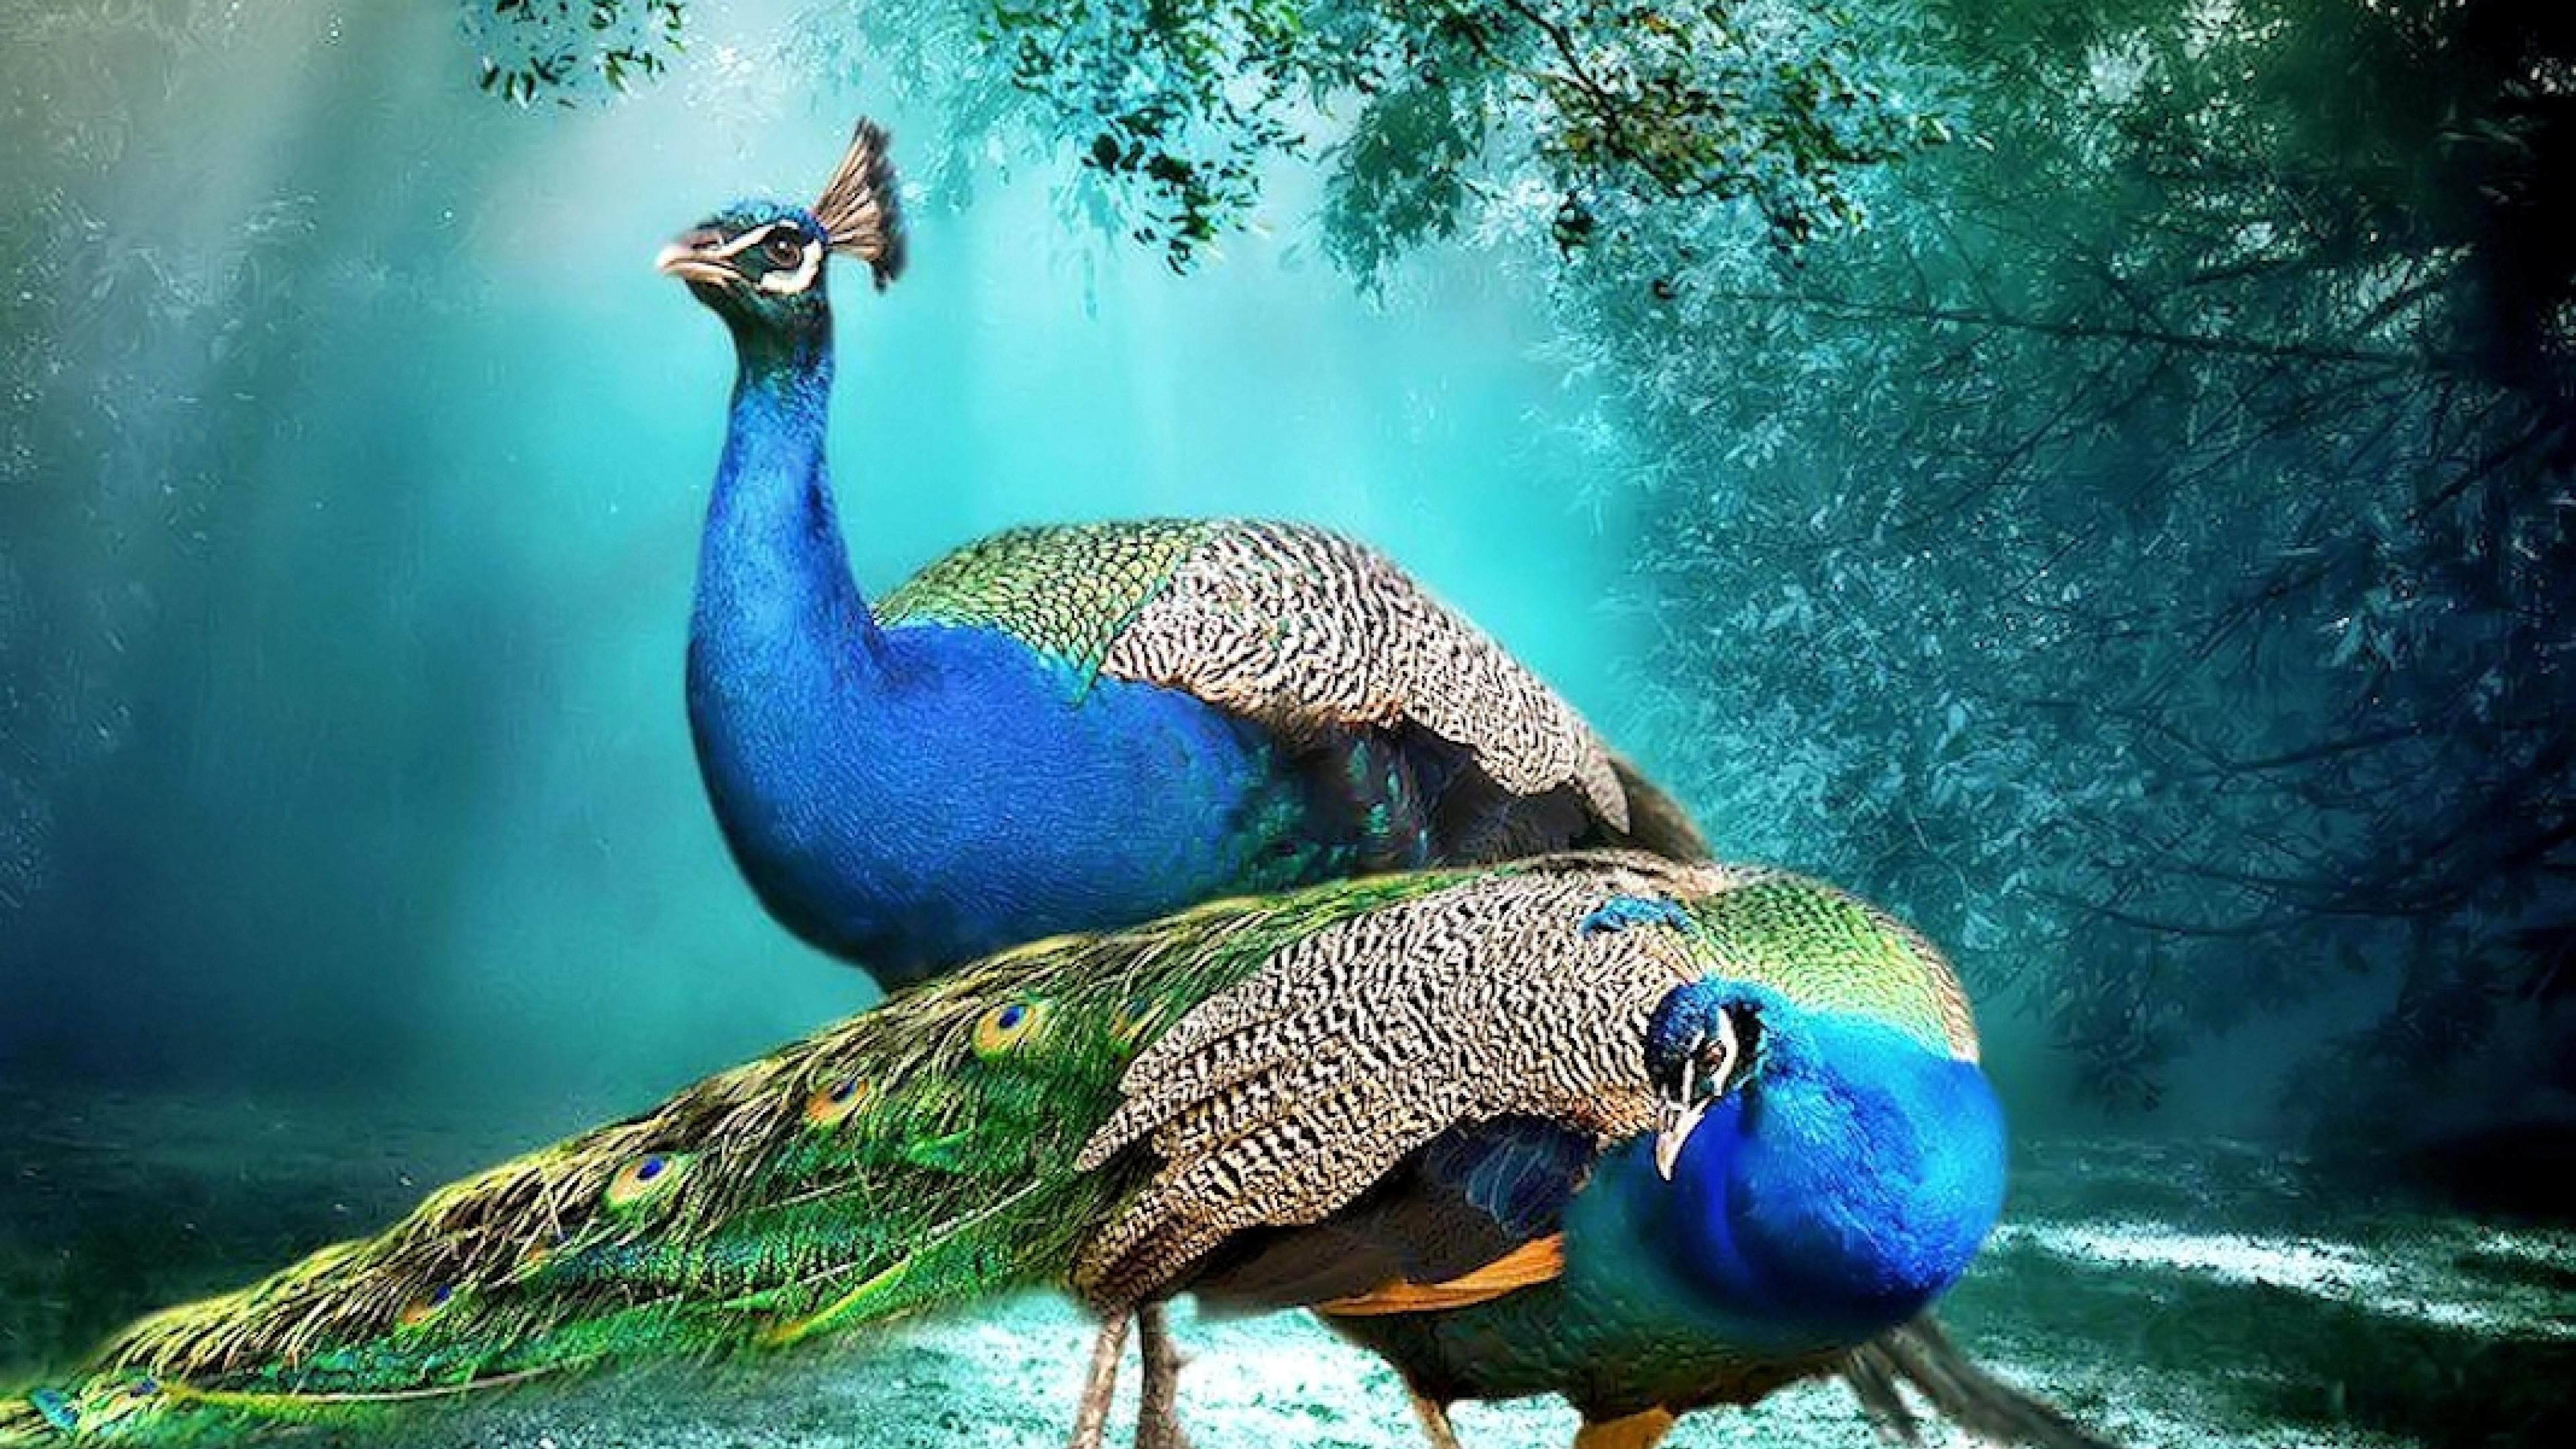 Two Peacocks Image Abyss